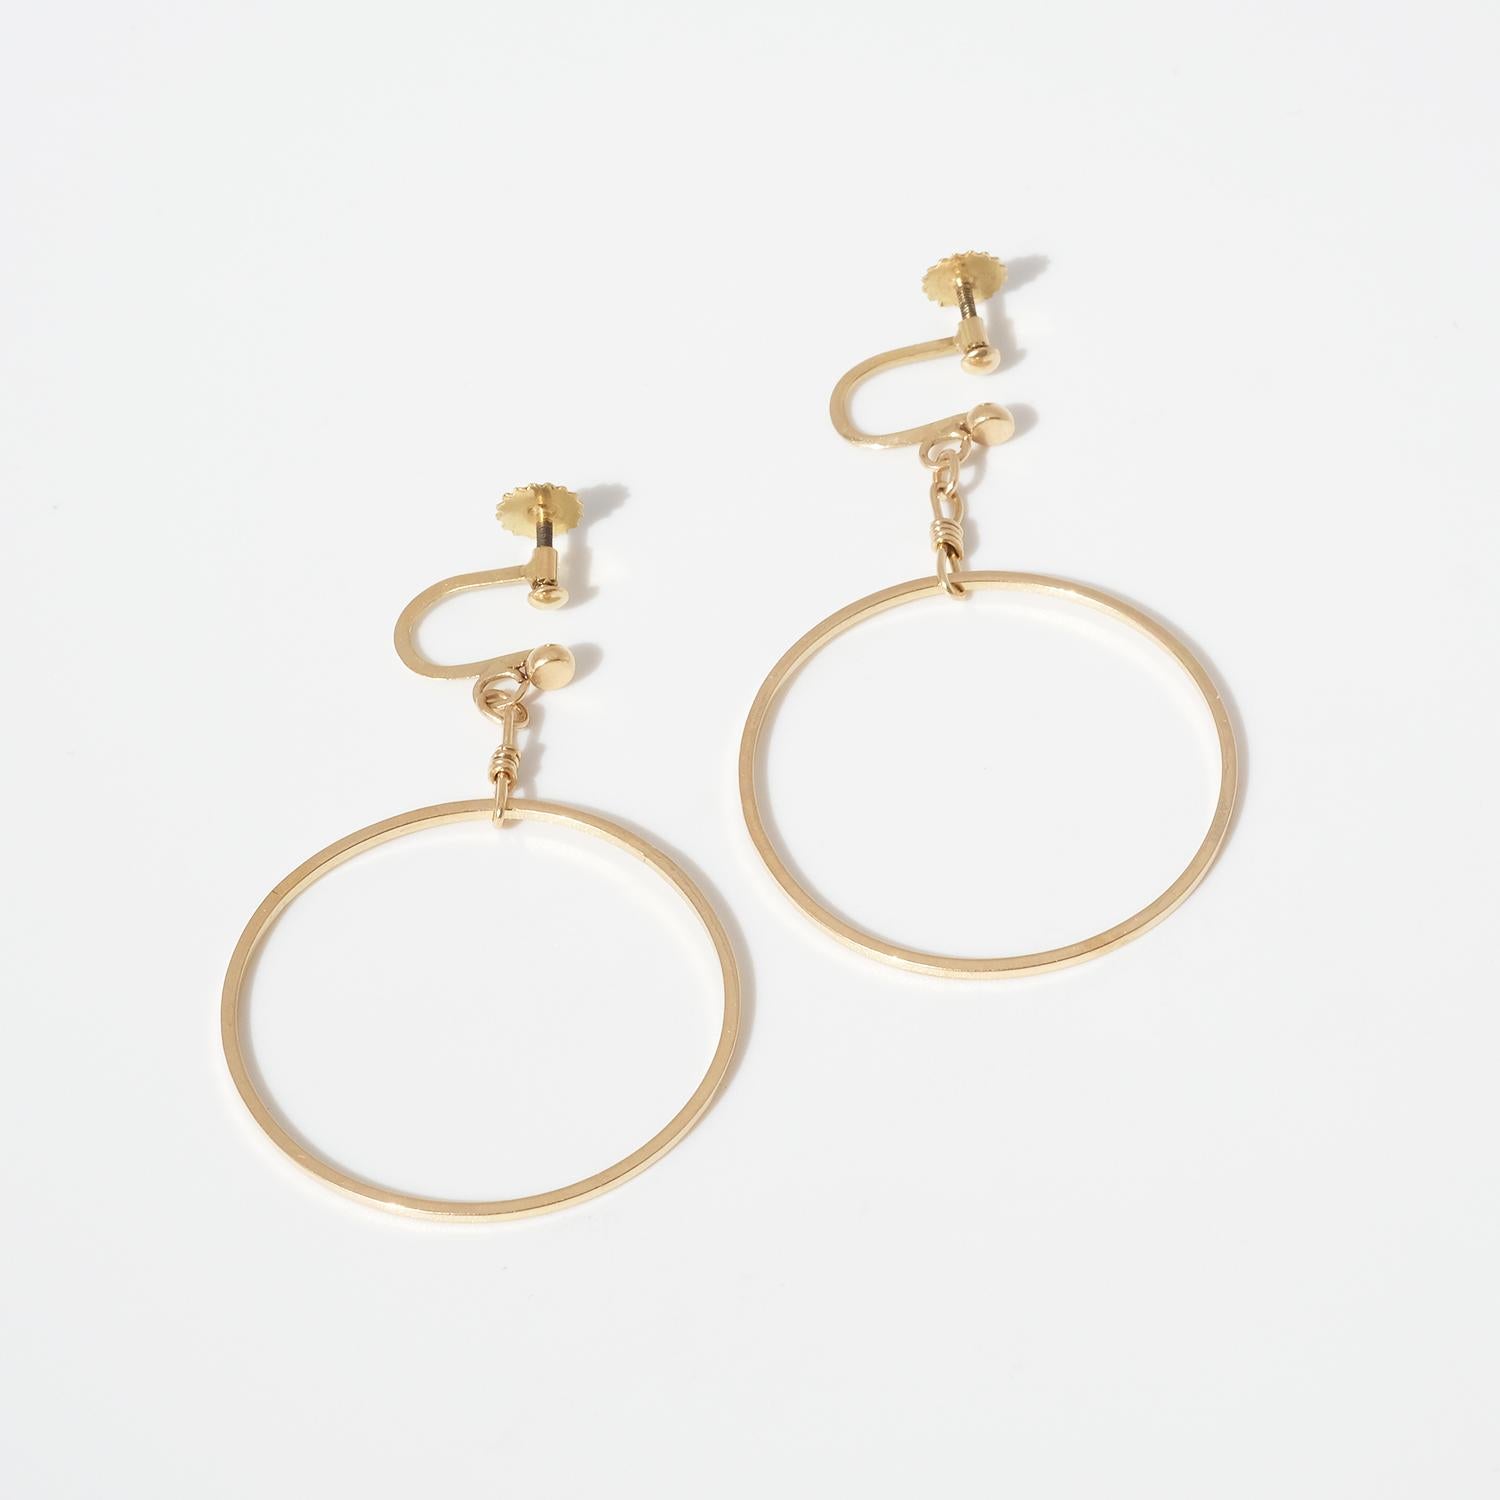 Pair of 18 K Gold Earrings Made in 1956, Swedish 4